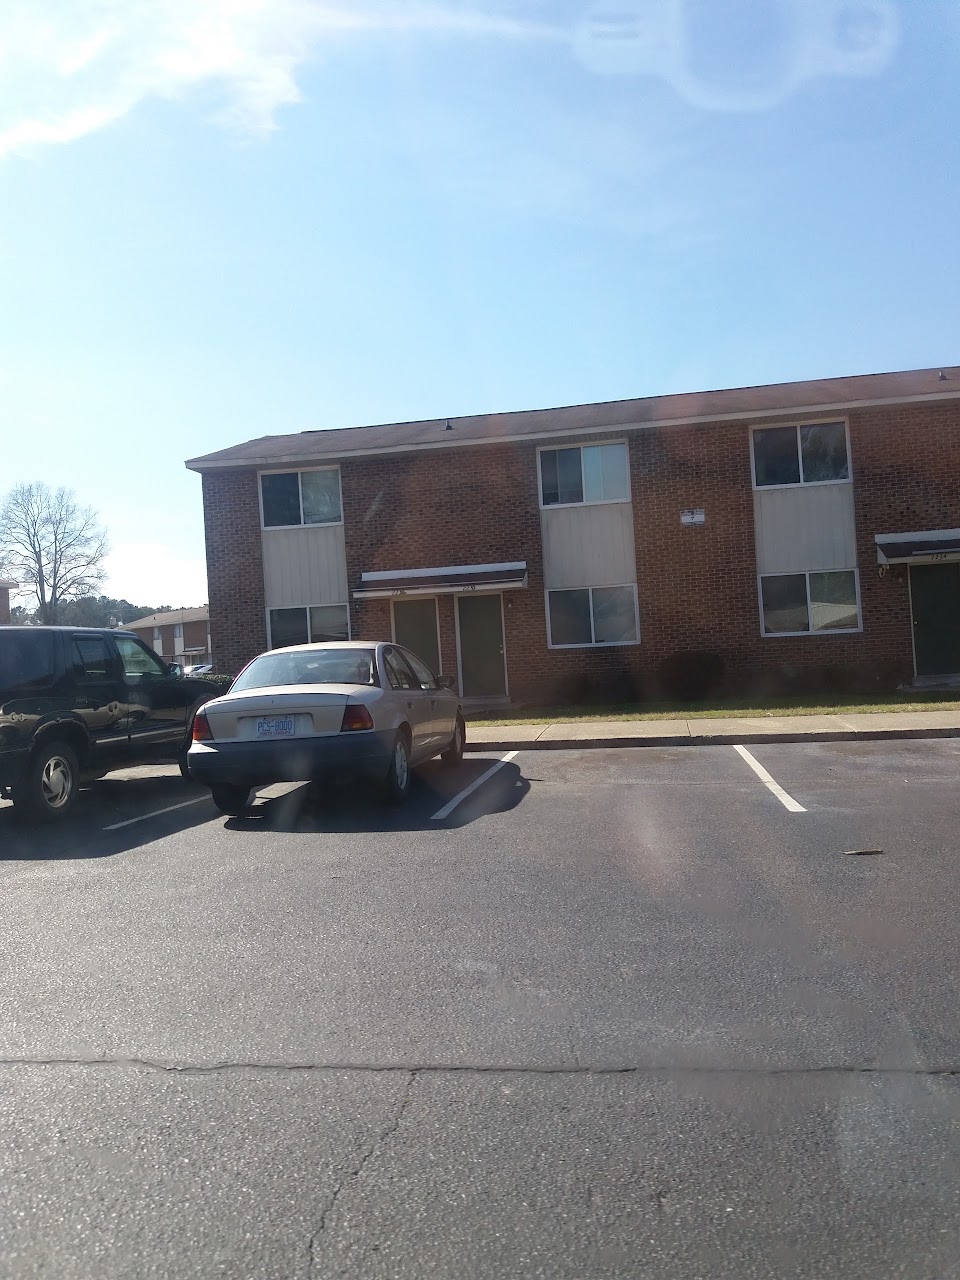 Photo of JOHNSON COURT APARTMENTS. Affordable housing located at 2228 KAY DR SMITHFIELD, NC 27577